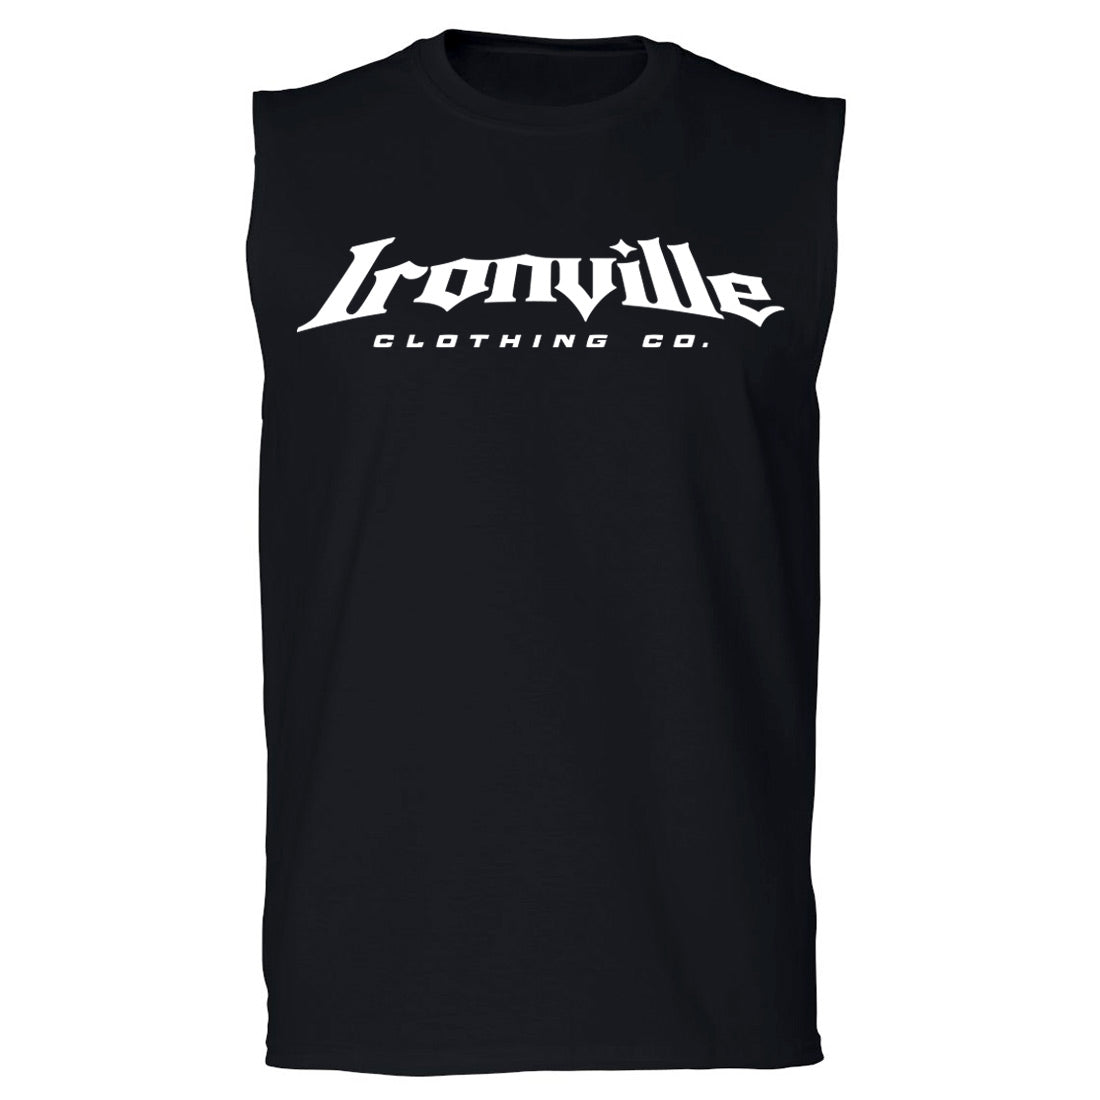 Ironville DON'T DIE Sleeveless Muscle T-shirt